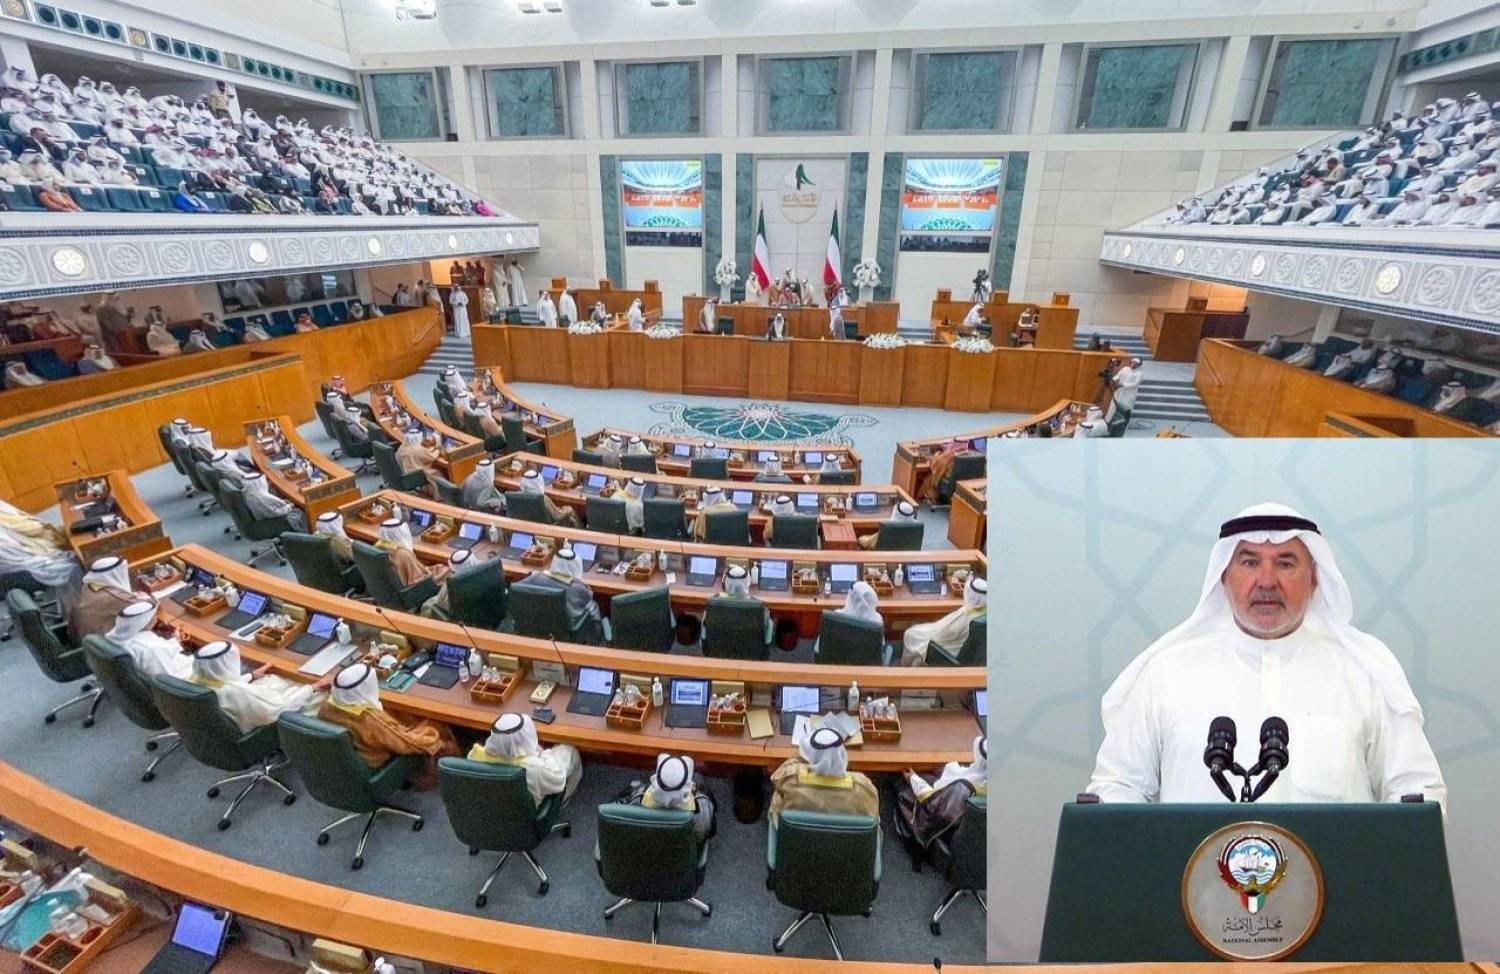 Kuwaiti MP Saleh Ashour invited lawmakers to attend the new National Assembly’s opener on Sunday, April 21